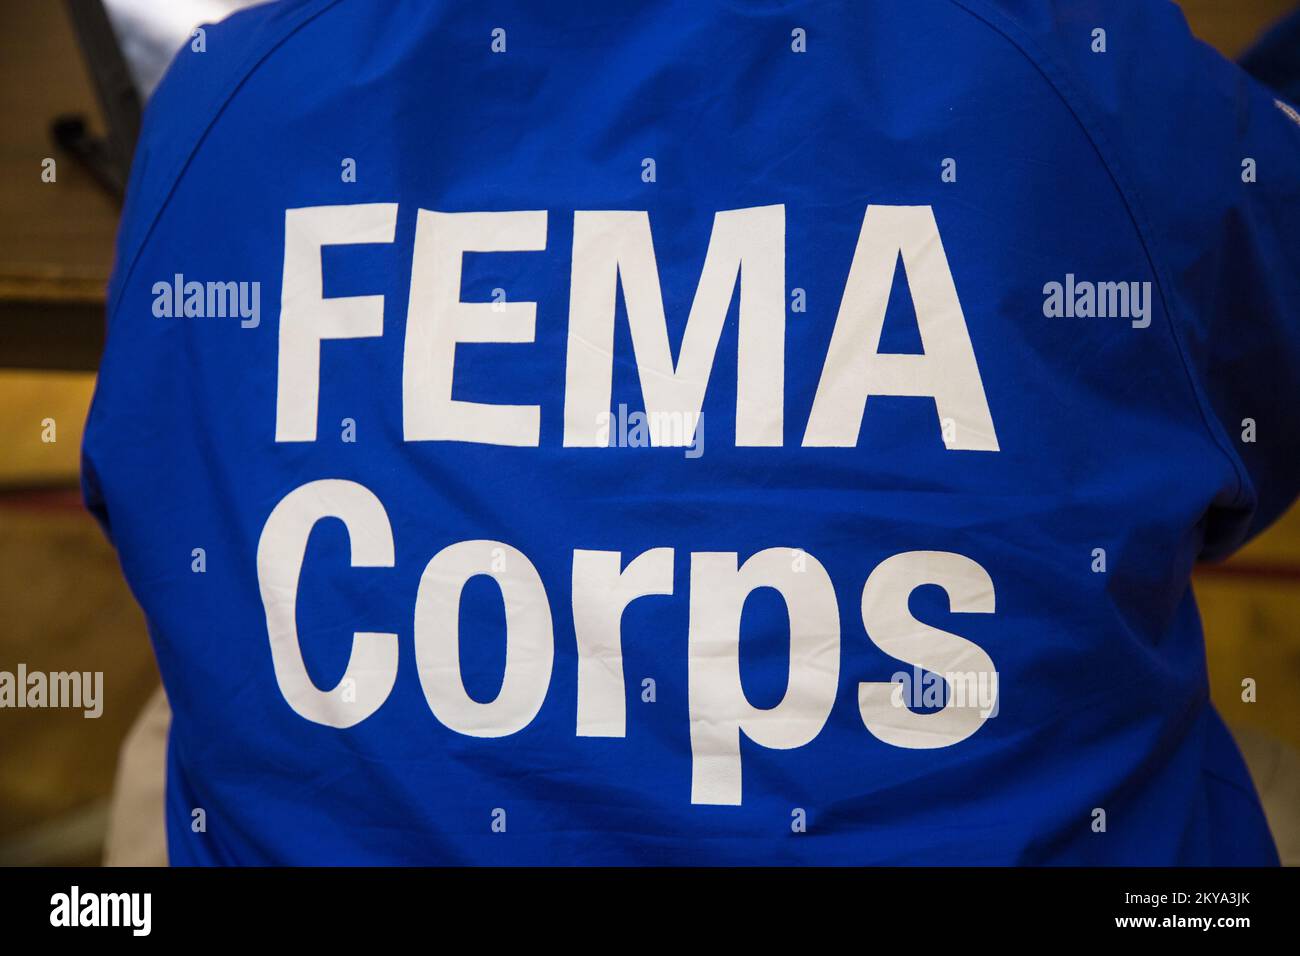 Highland Park, MI, October 4, 2014 - The back of the jacket of Forrest Evans, FEMA Corps Spruce 2 DSA Specialist, as he assists disaster survivor Jolita Cotton at a Recovery Support Site (RSS) in the gymnasium of the Detroit Rescue Mission Community Center in Highland Park, Michigan after the Detroit metropolitan counties of Oakland, Wayne and Macomb were adversely impacted by severe storms and flooding on August 11-13, 2014. FEMA Supports local and state governments and tribal entities in their efforts to recover from natural disasters. Michigan Severe Storms and Flooding. Photographs Relatin Stock Photo